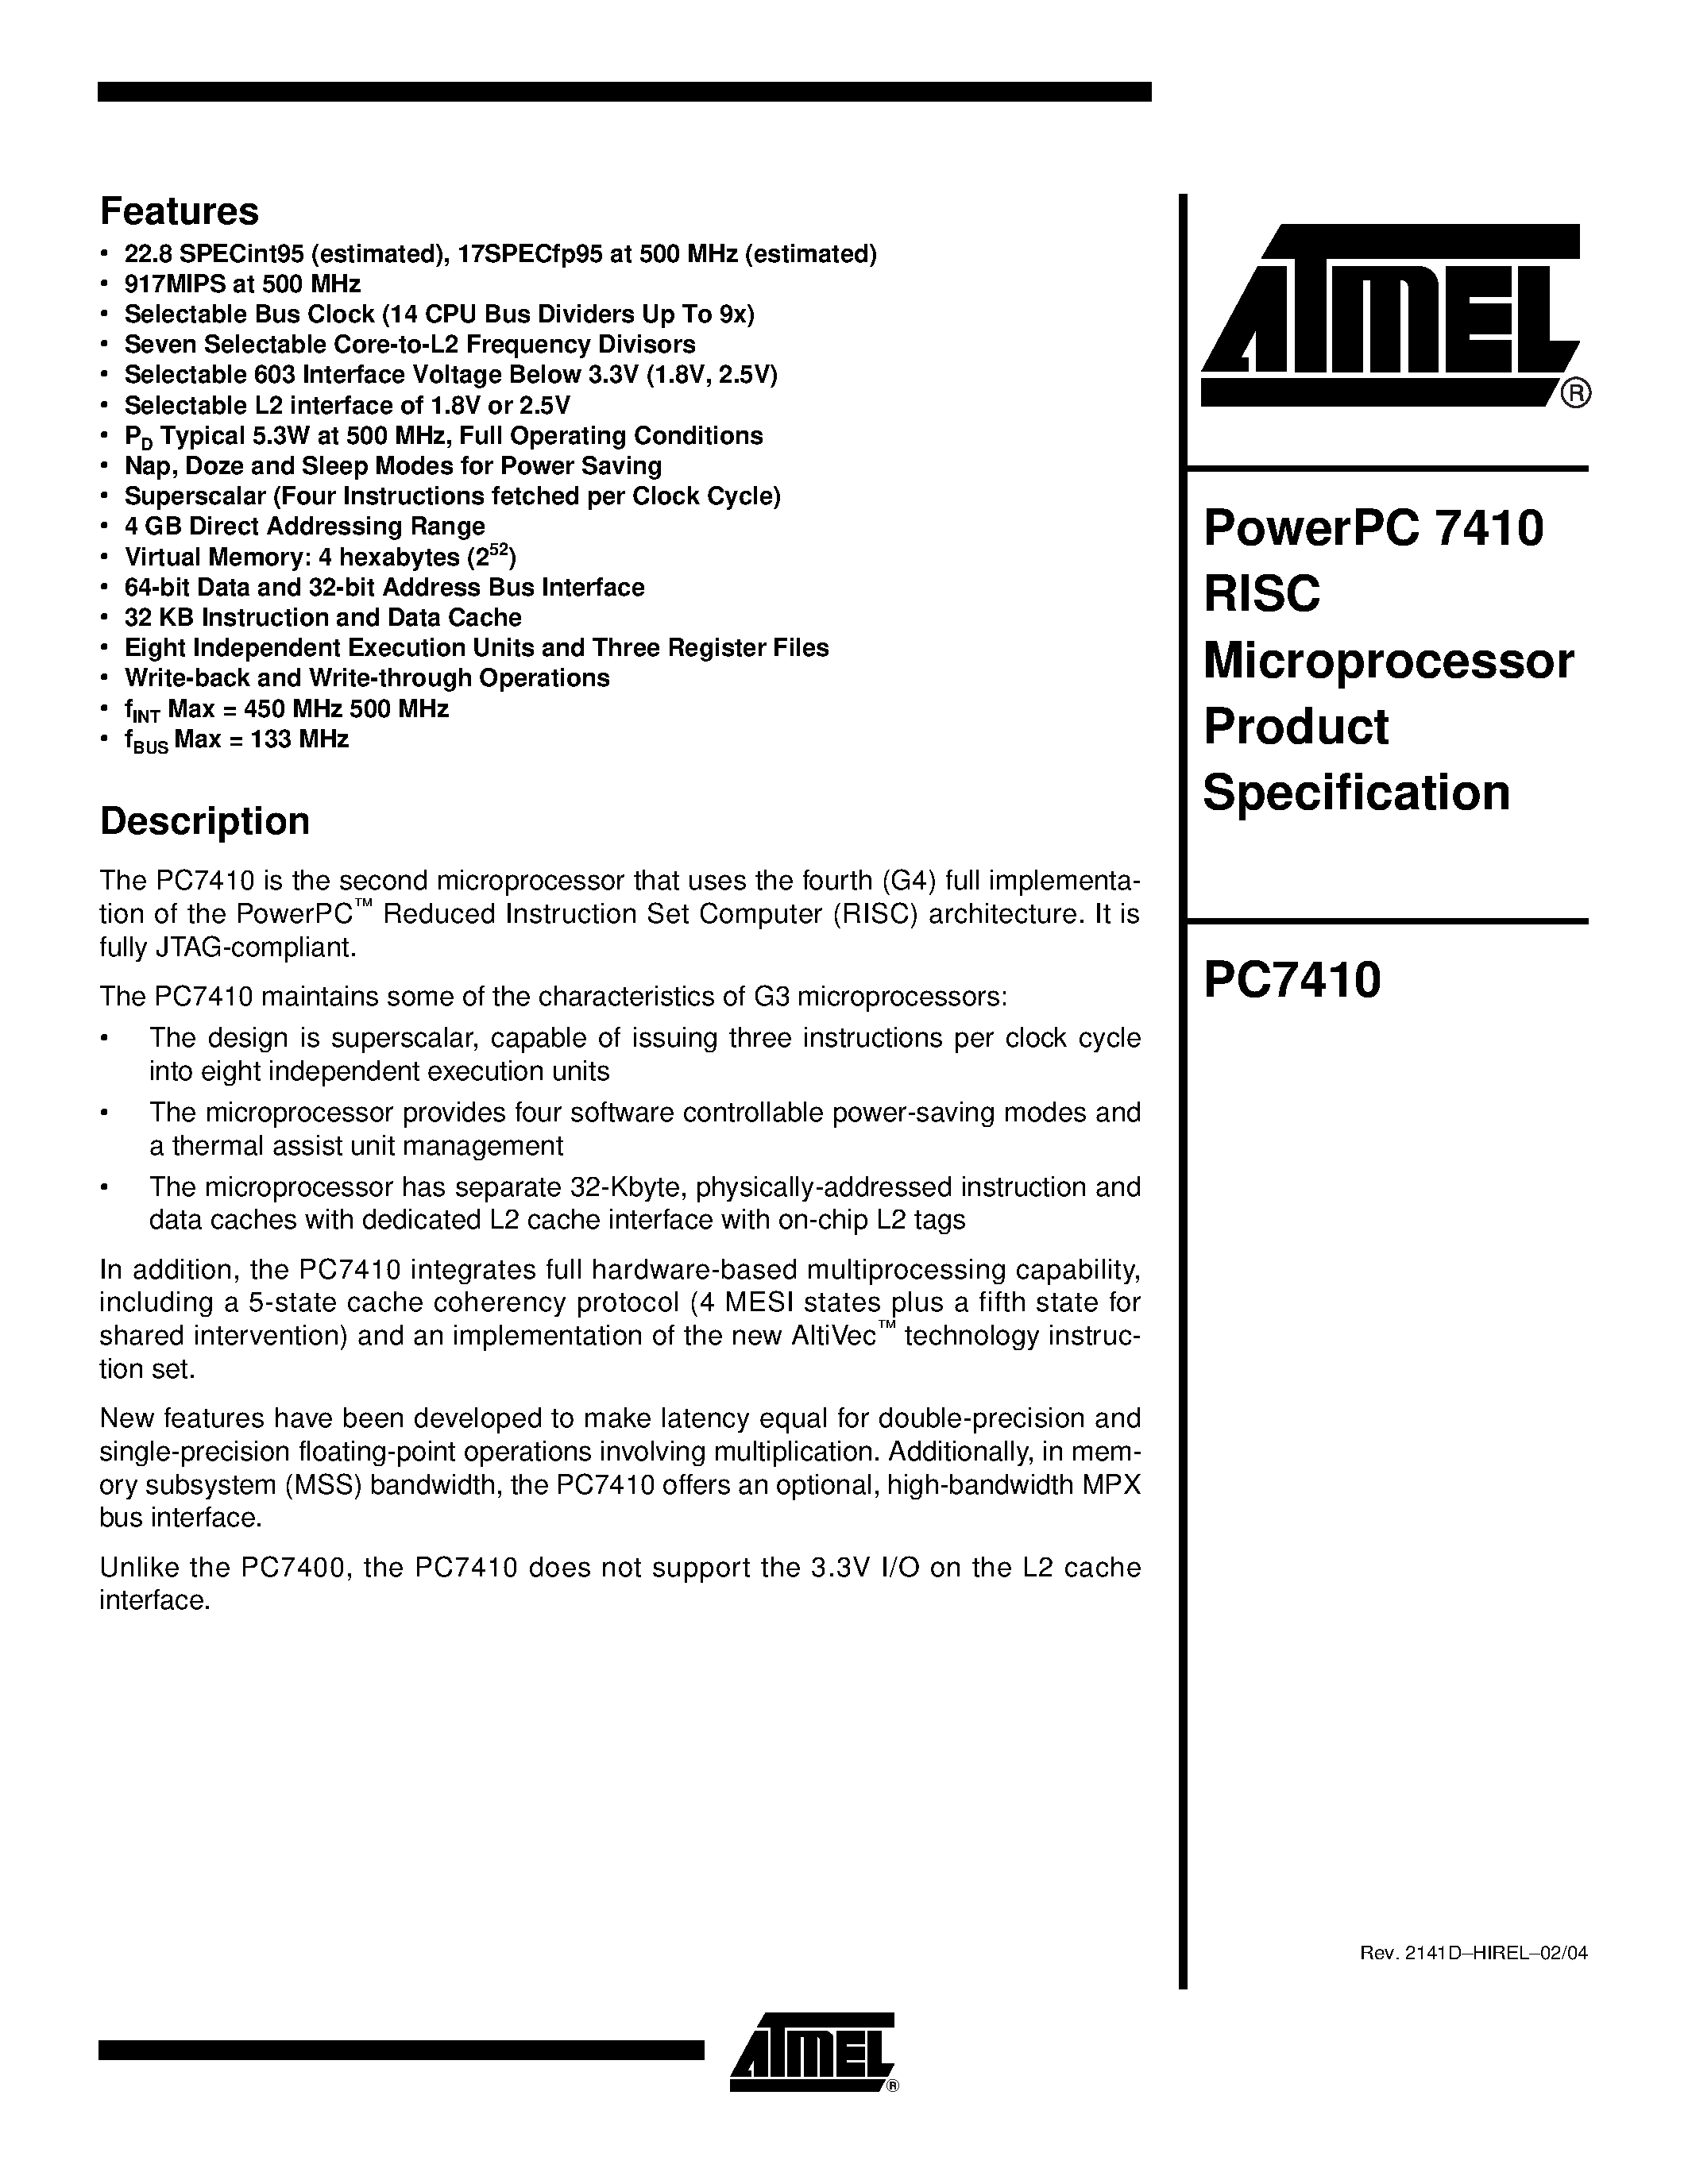 Даташит PC7410 - PowerPC 7410 RISC Microprocessor Product Specification страница 1